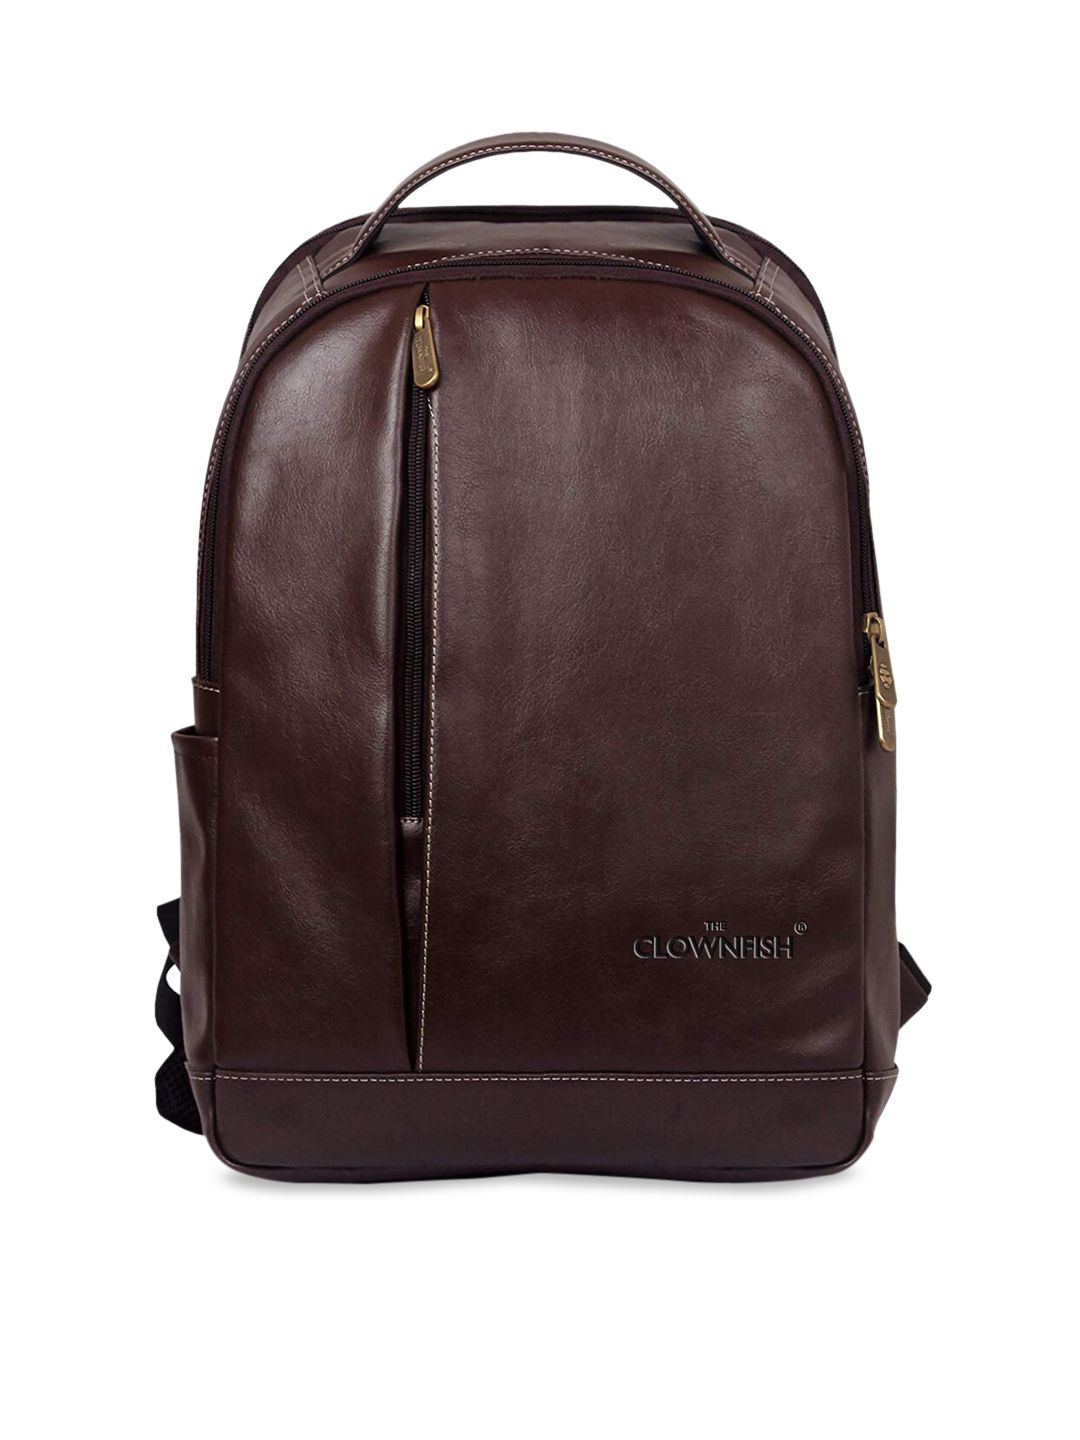 THE CLOWNFISH Unisex Brown Solid 27L Backpack Price in India